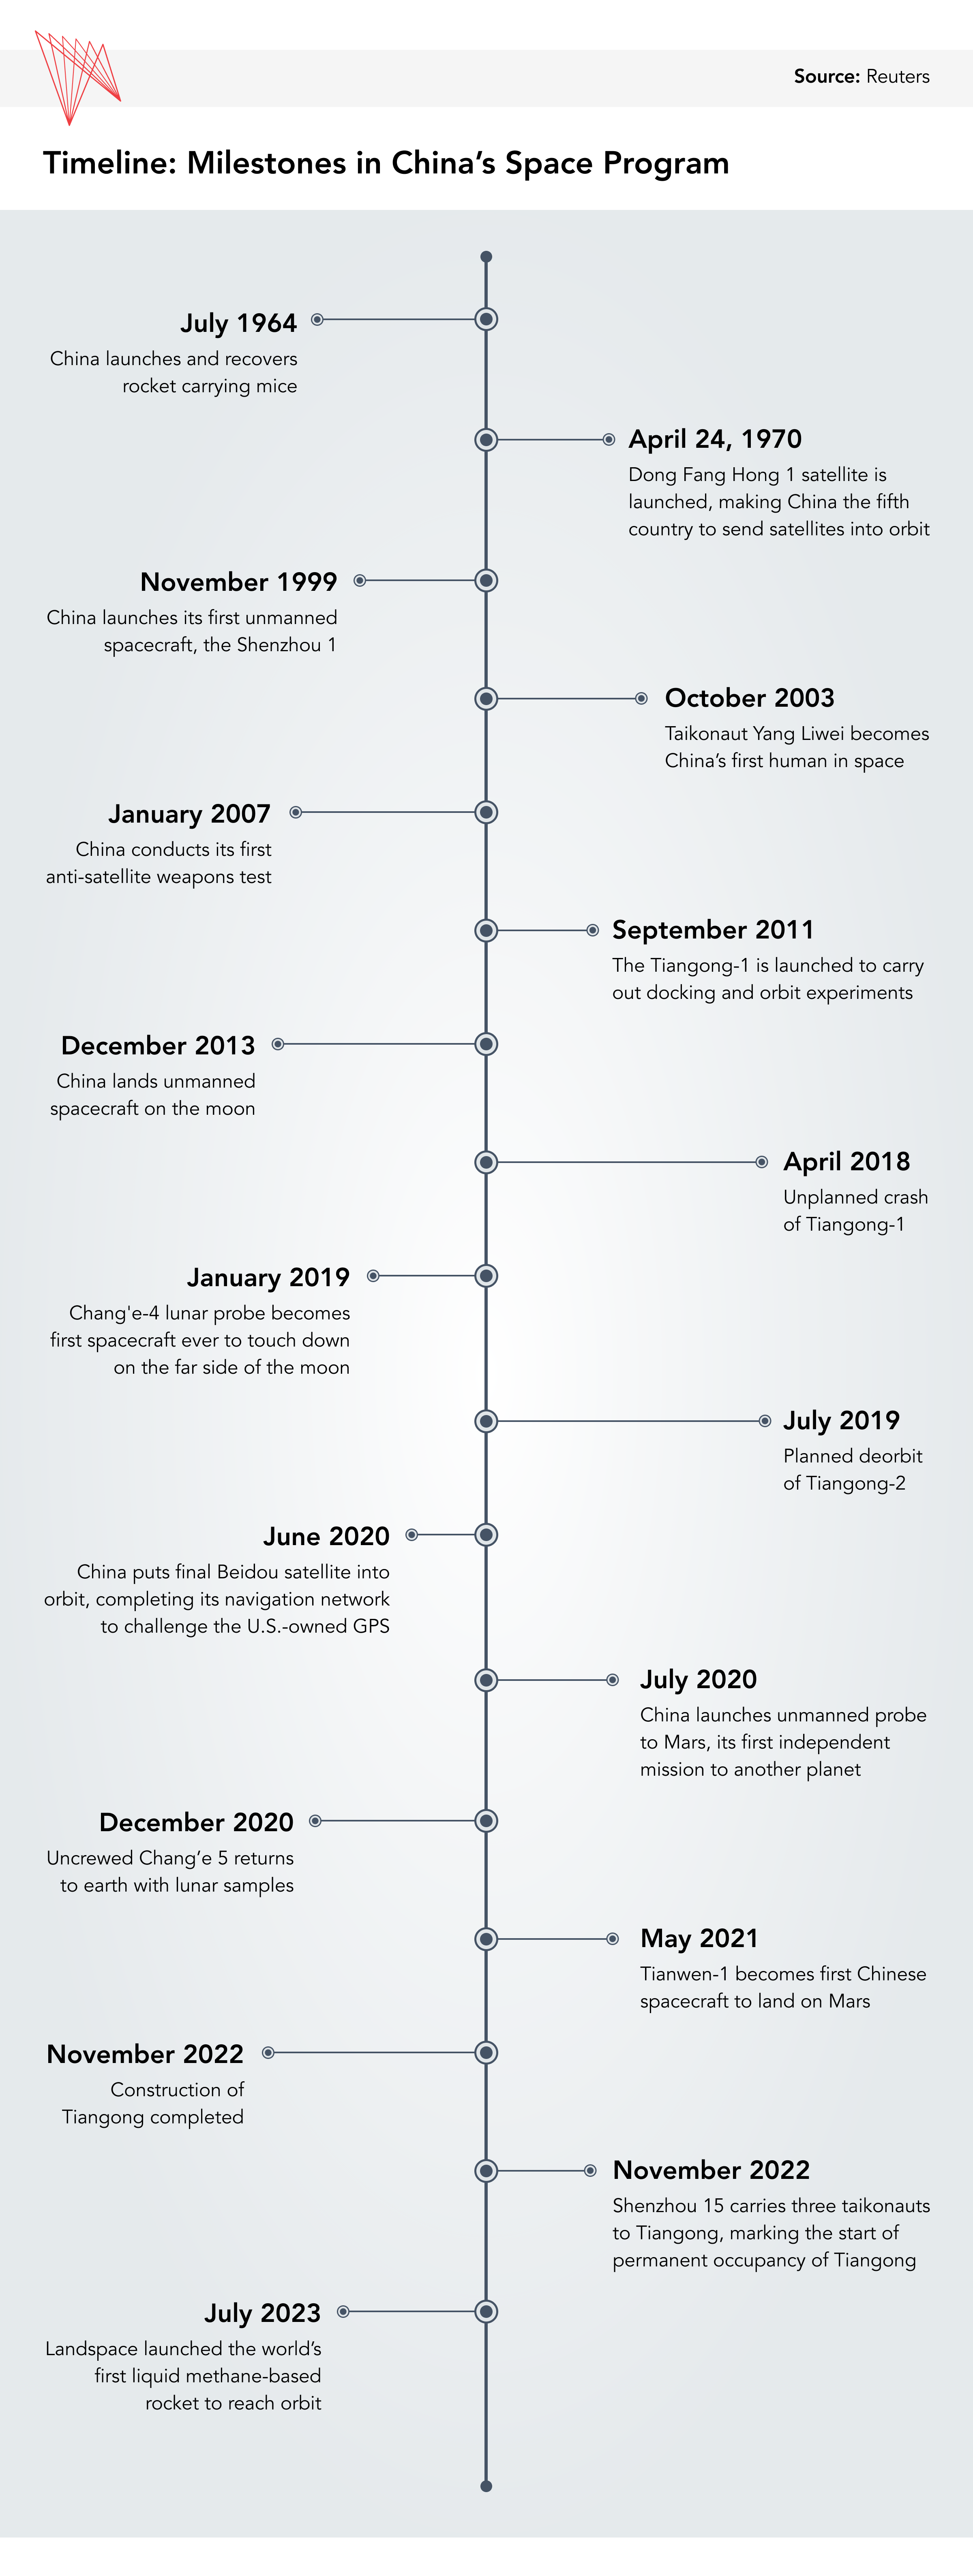 Timeline of China's space program